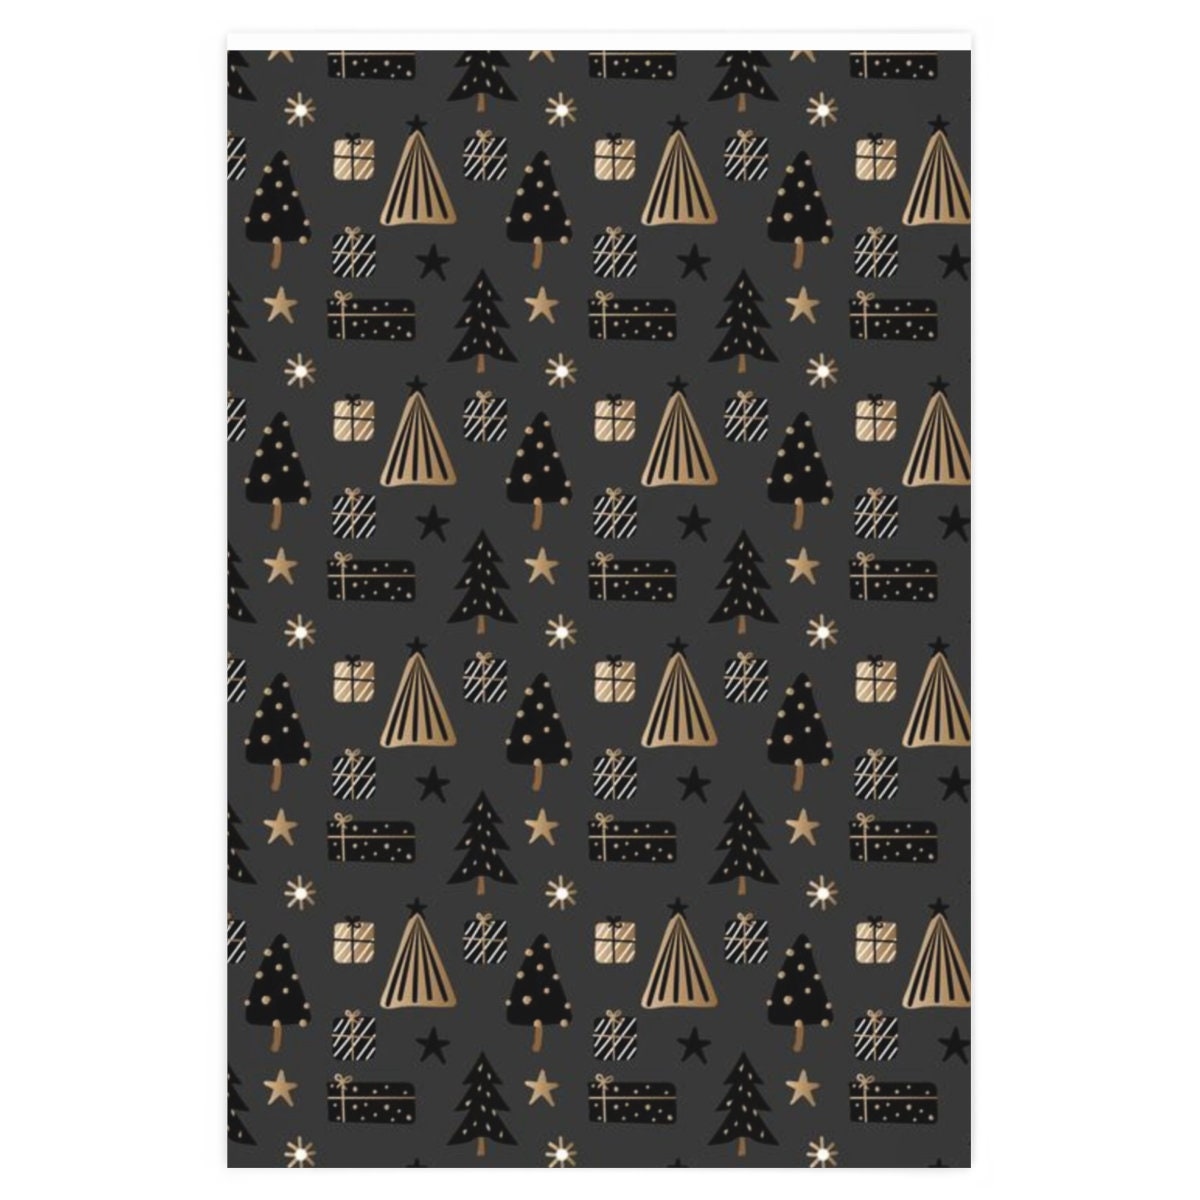 Artsy Dark Christmas Print Wrapping Paper Roll of Holiday Wrapping Paper 24  36 or 24 60 